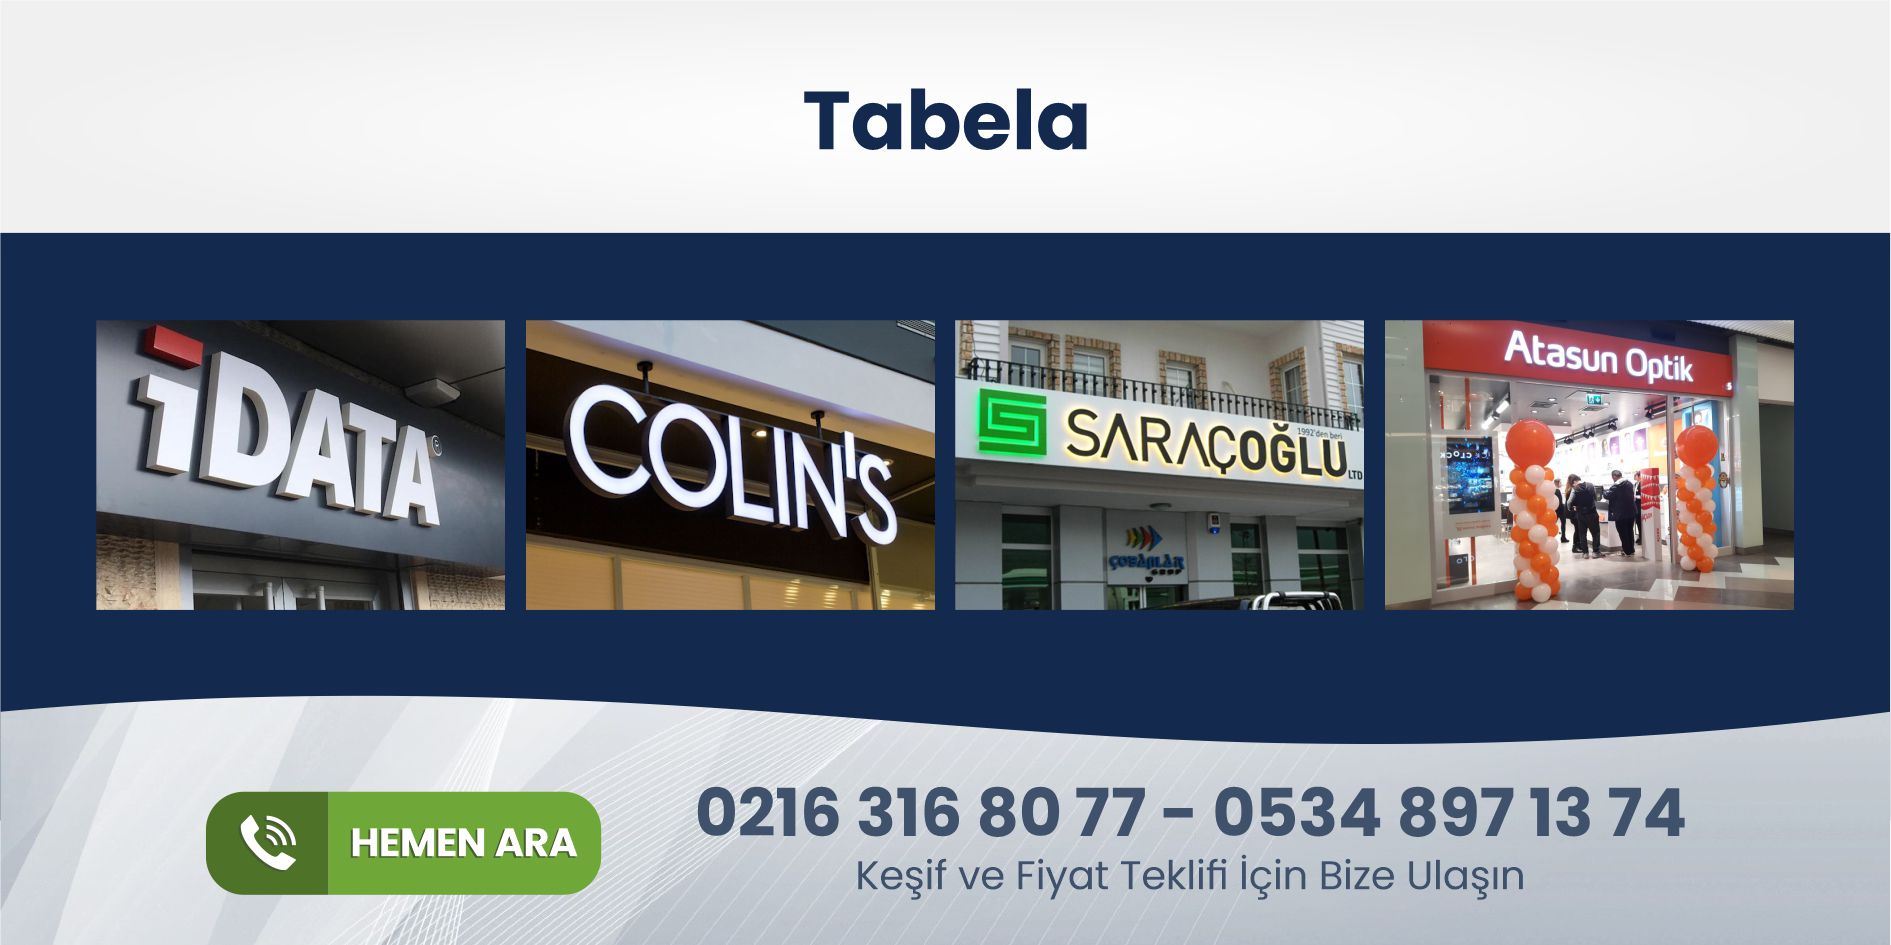 You are currently viewing Zerzavatçı Tabela